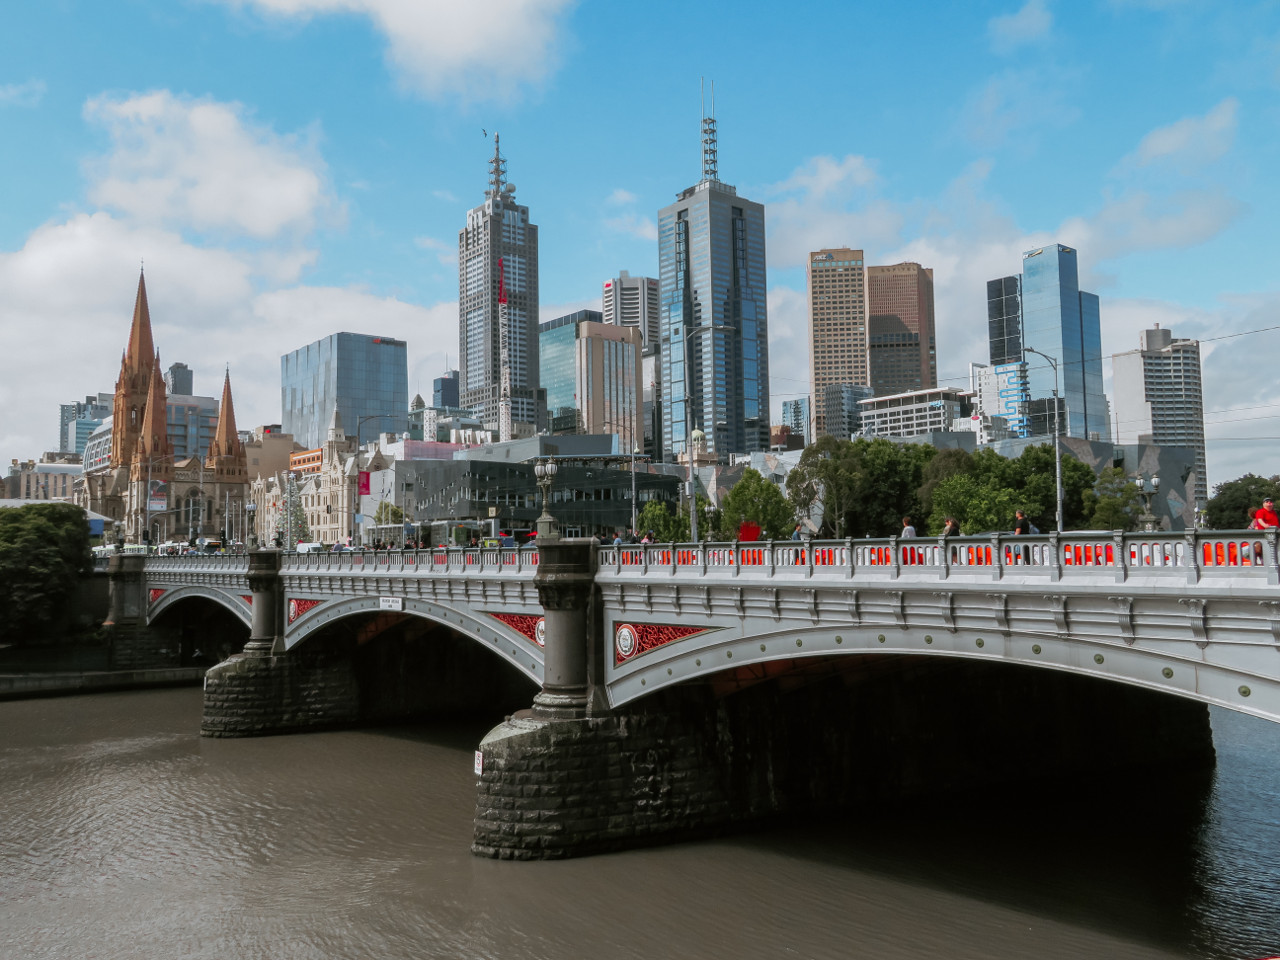 Your complete guide to Melbourne with the best places to visit in Melbourne, tips, accommodation, food, and Melbourne sightseeing #melbourne #australia #australiatravel #melbournetips